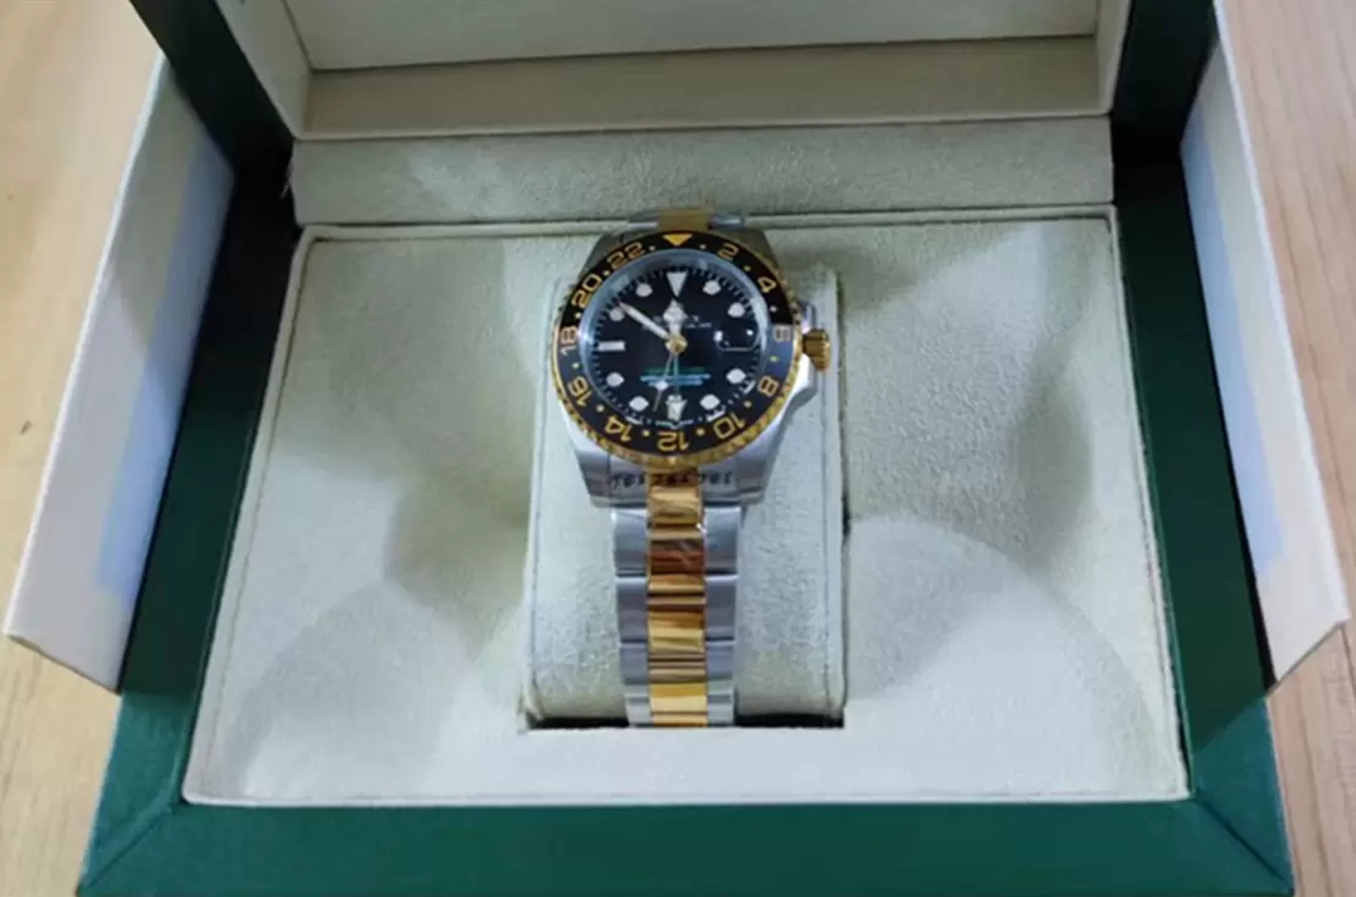 

With original box High Quality Wristwatches Ceramic Bezel Black Dial Gold GMT 116718 Asia 2813 Movement Automatic Mens Men's Watch Watches 2558, Style 1 original box + watch